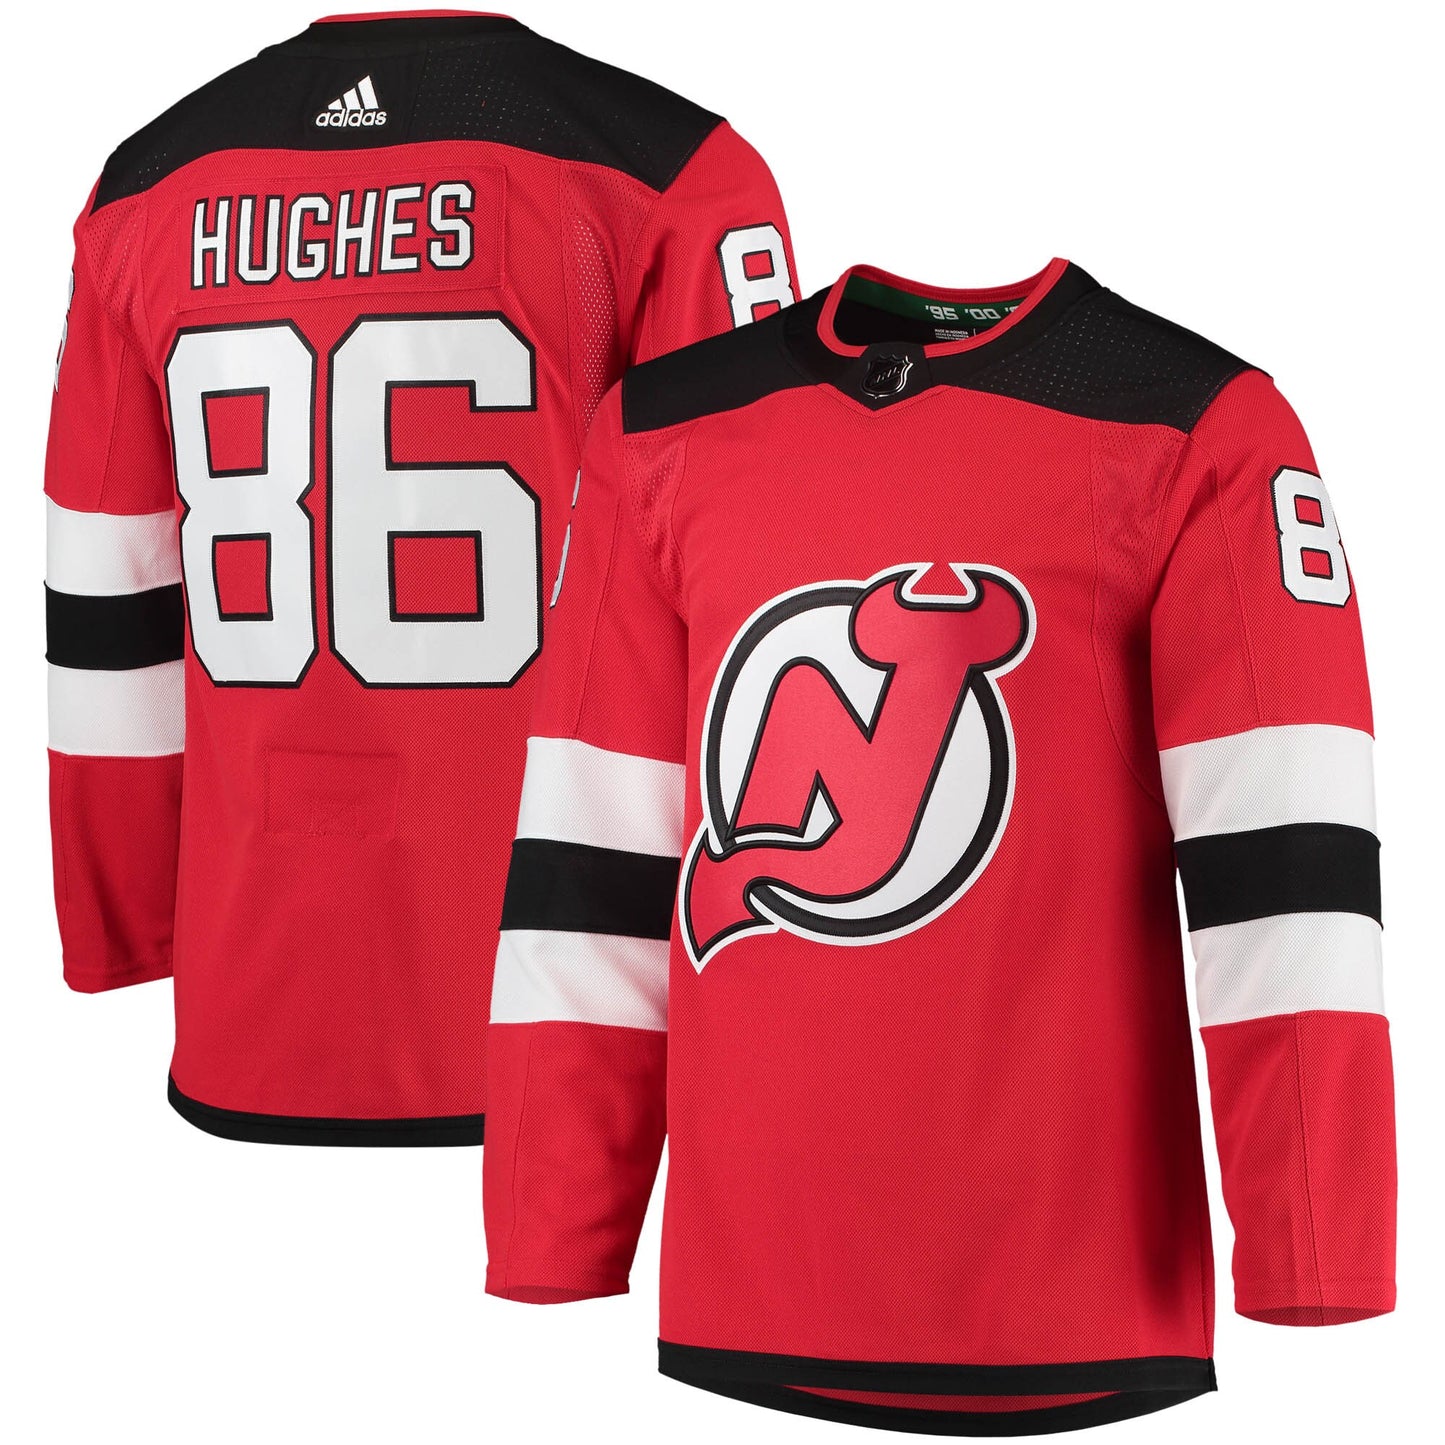 Jack Hughes New Jersey Devils adidas Home Primegreen Authentic Pro Player Jersey - Red